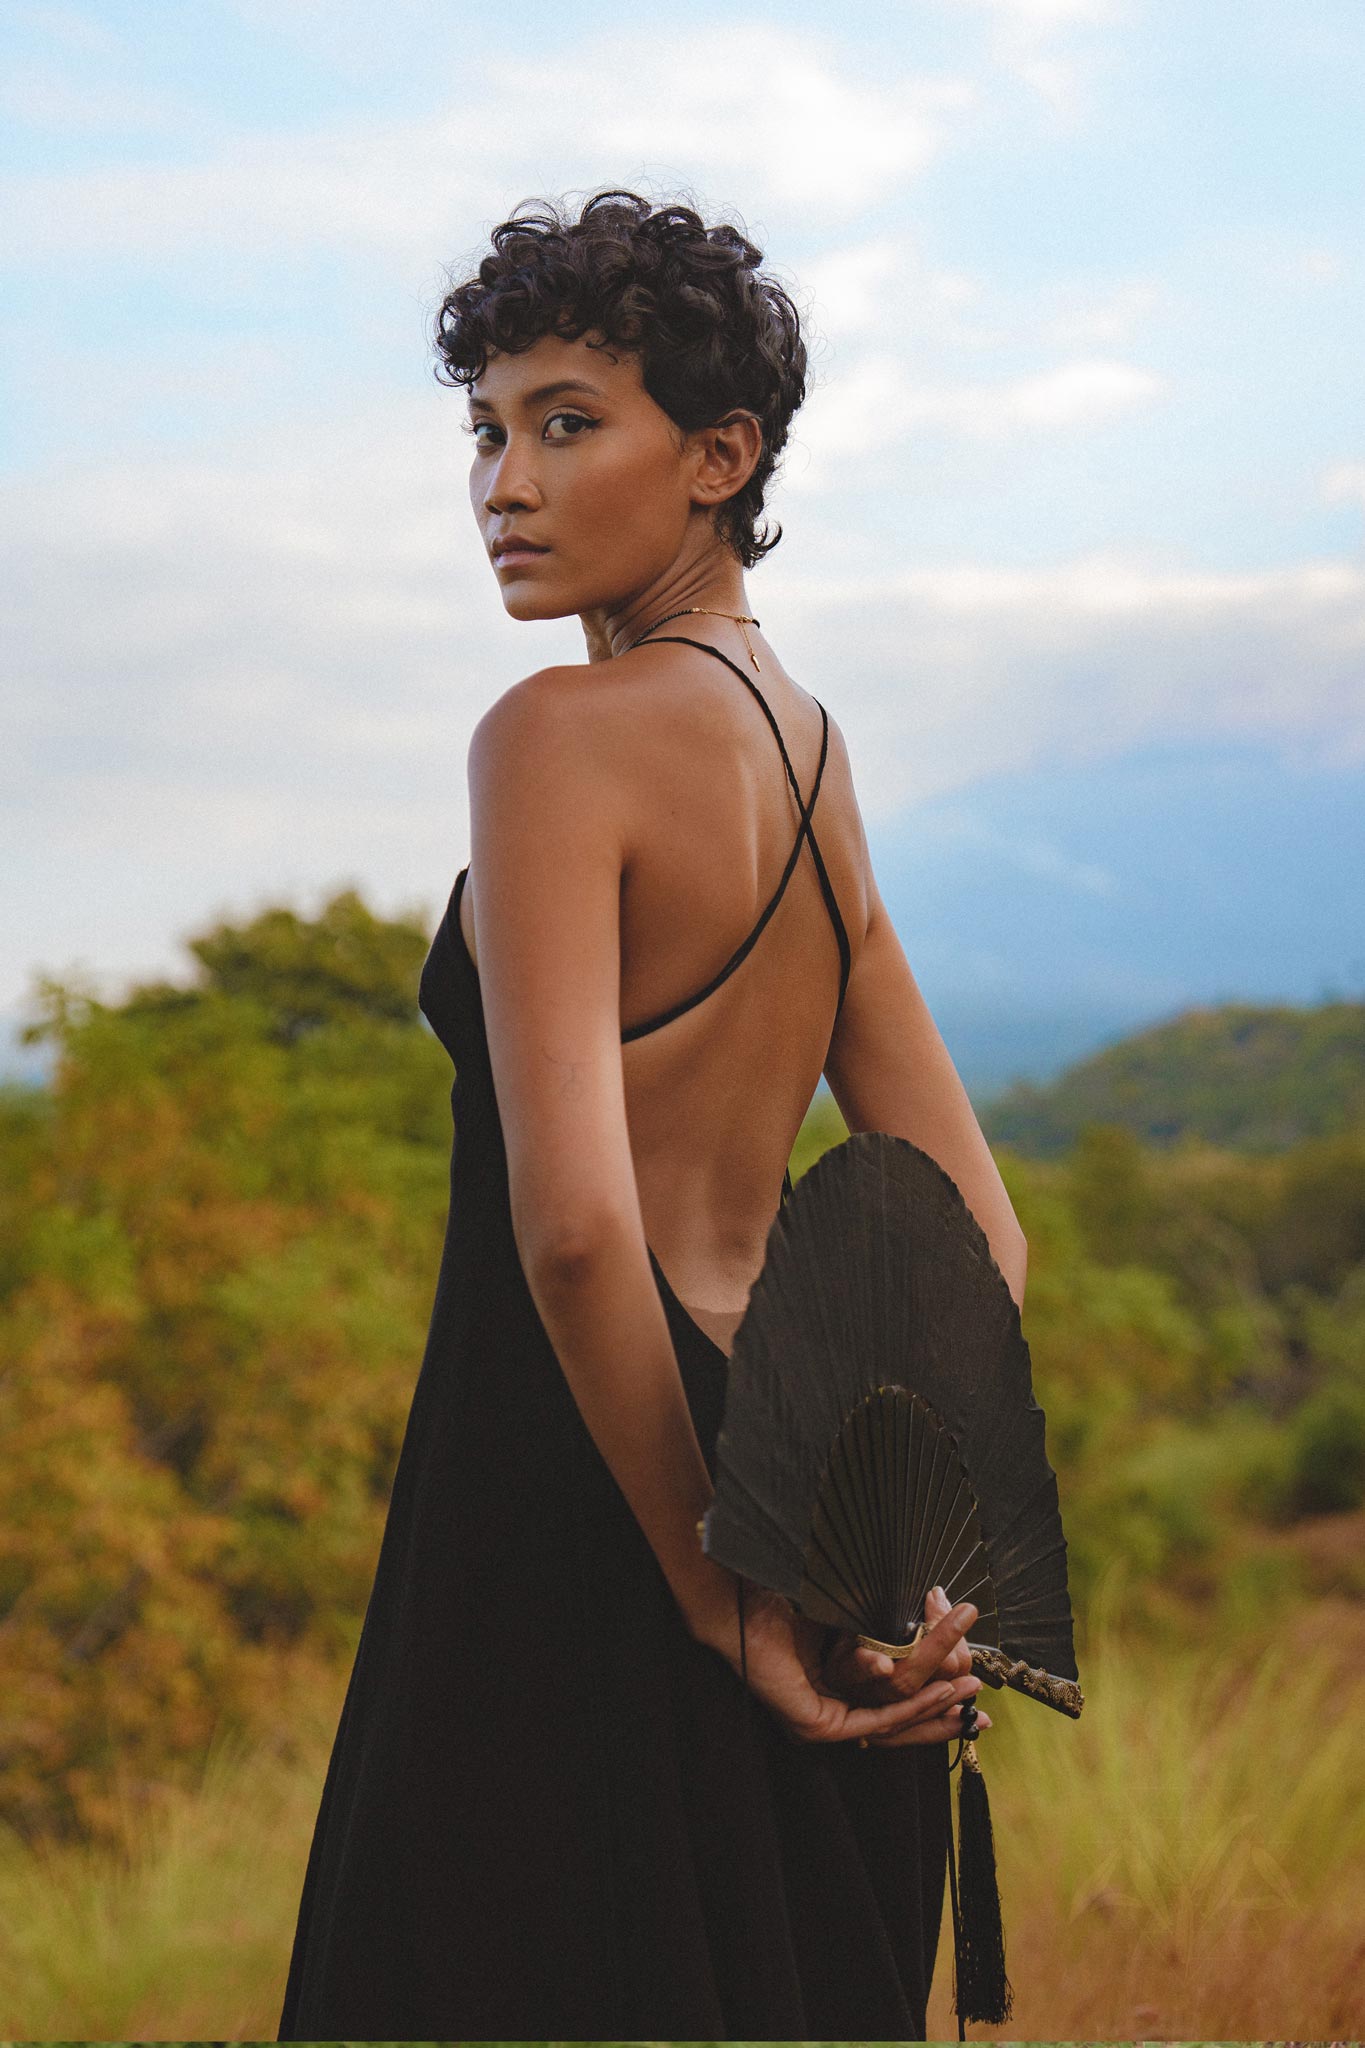 Channel your inner boho goddess with this black backless dress. A must-have for any minimalist lover, featuring handmade lace details.